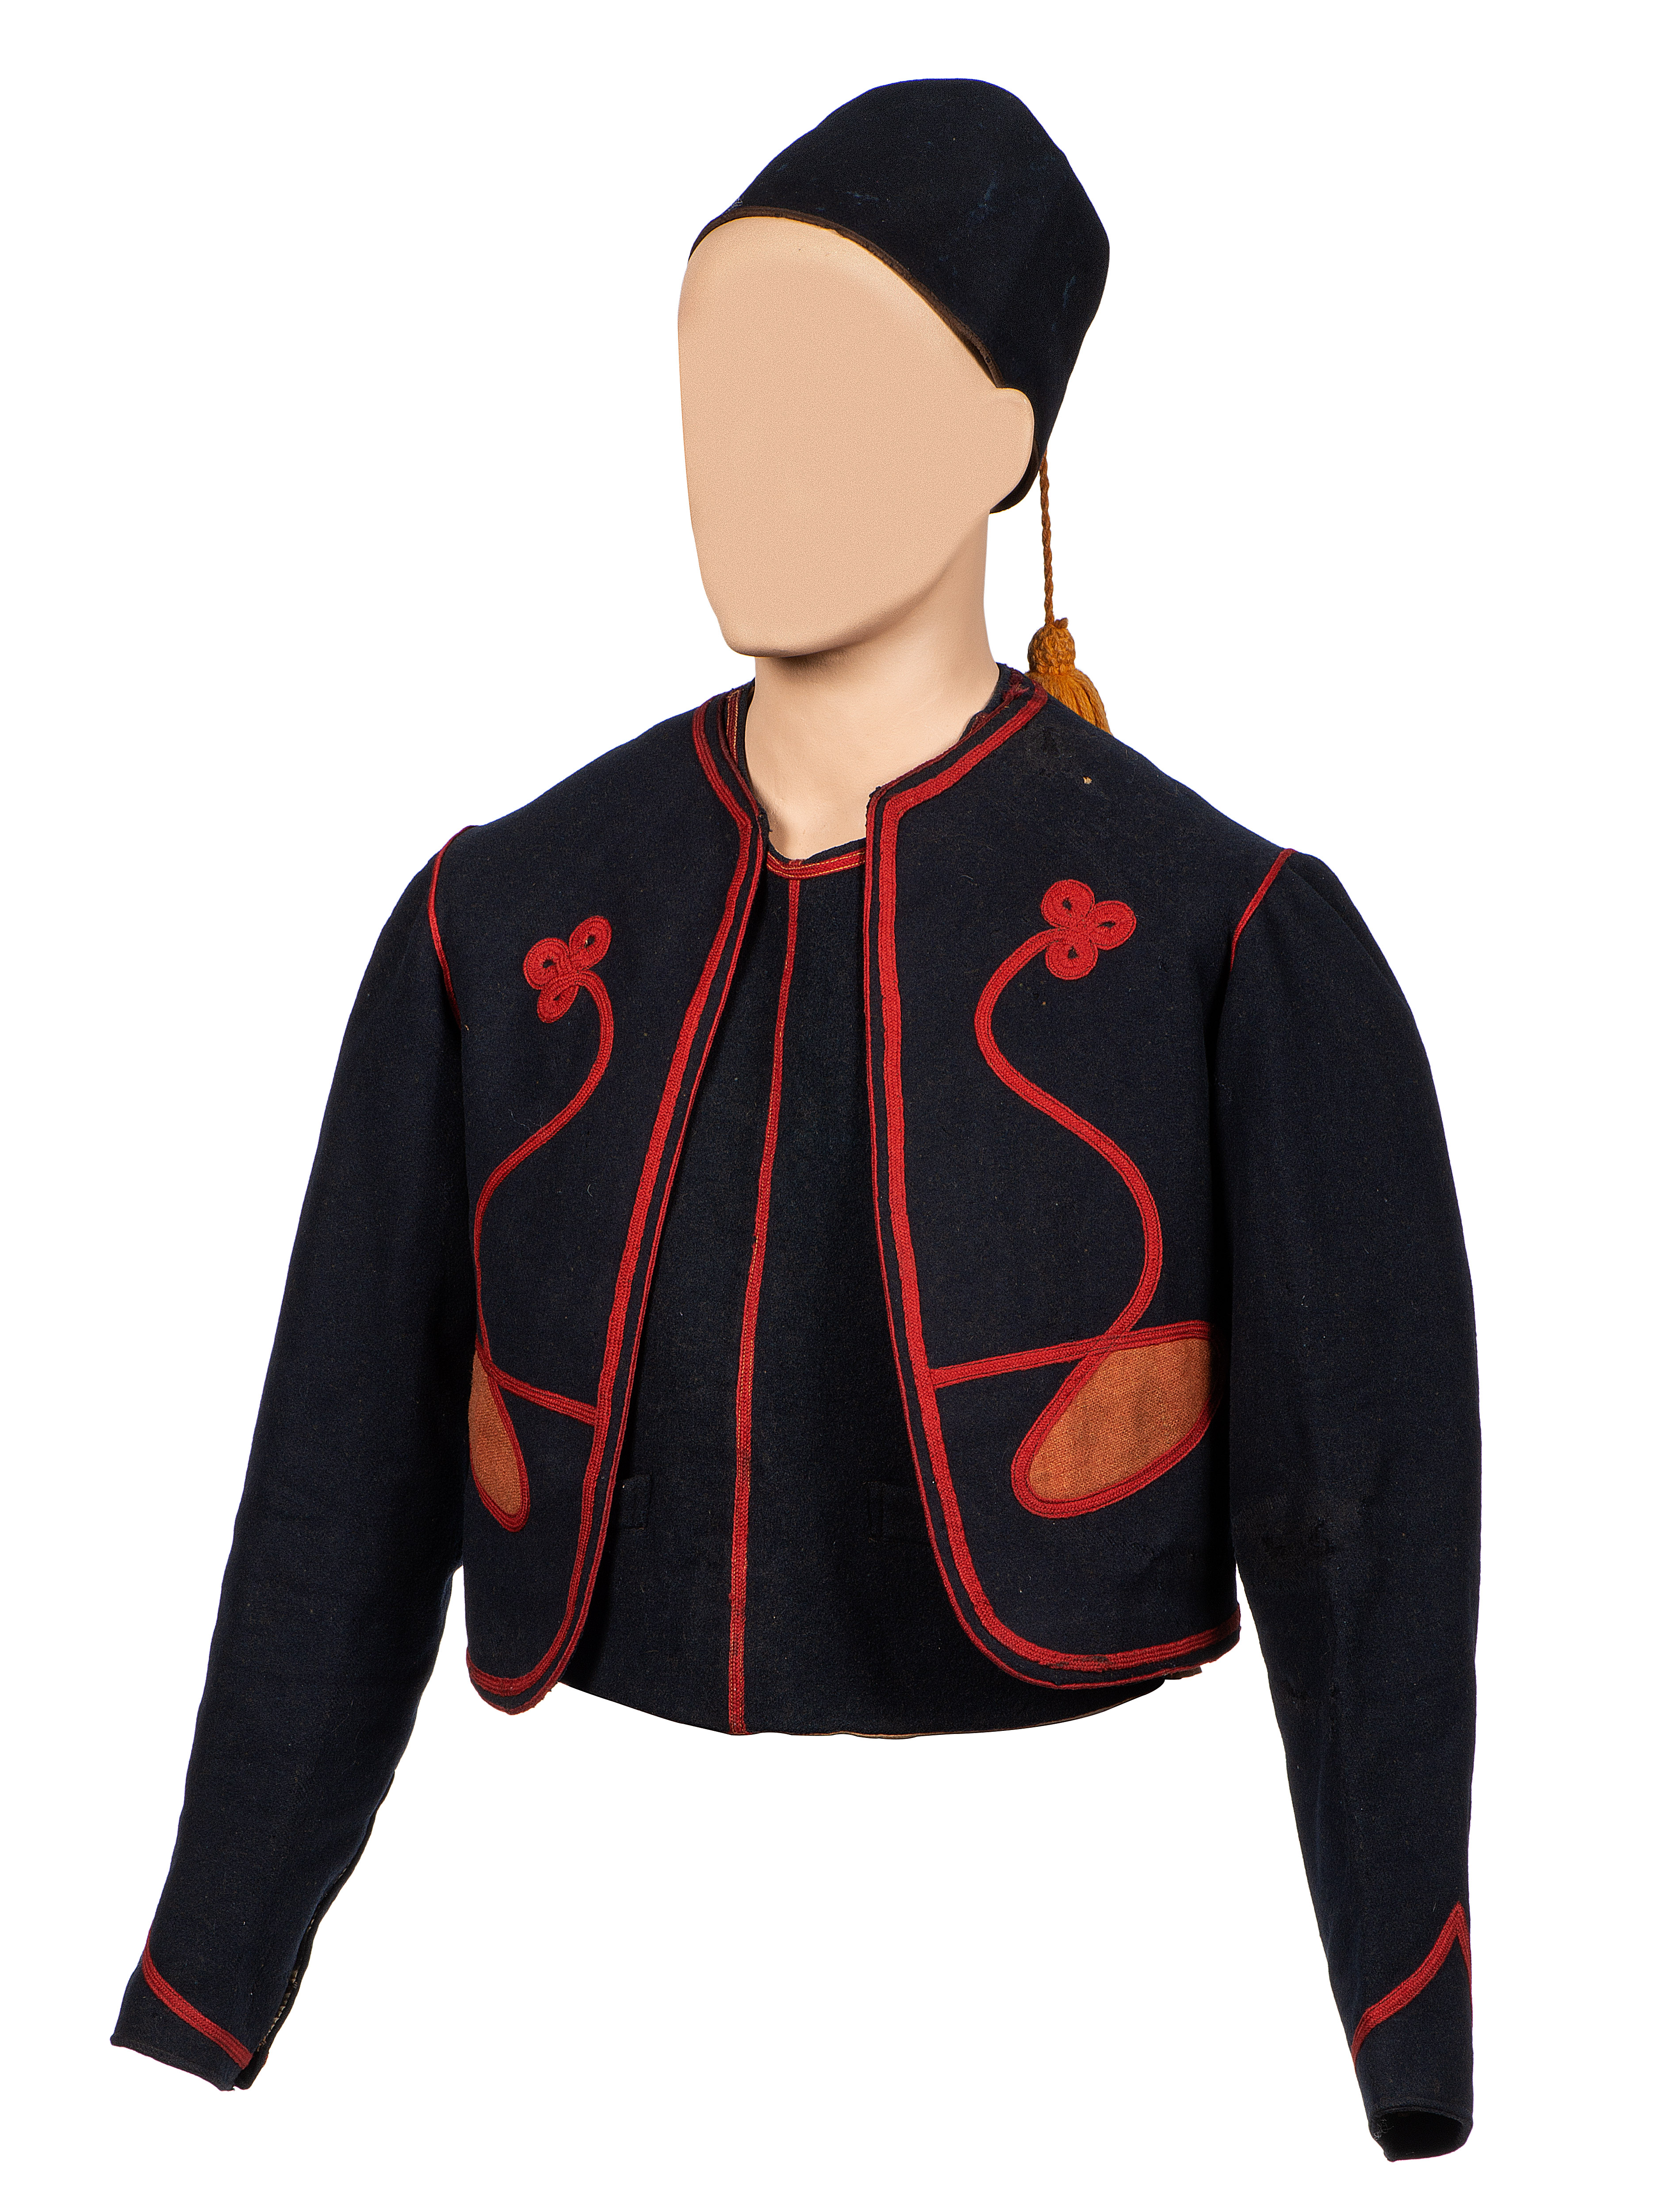 Uniform of the Cladek Zouaves, identified to Private Alfred T. Brophy, Co. K, 35th New Jersey Infantry, $20,000